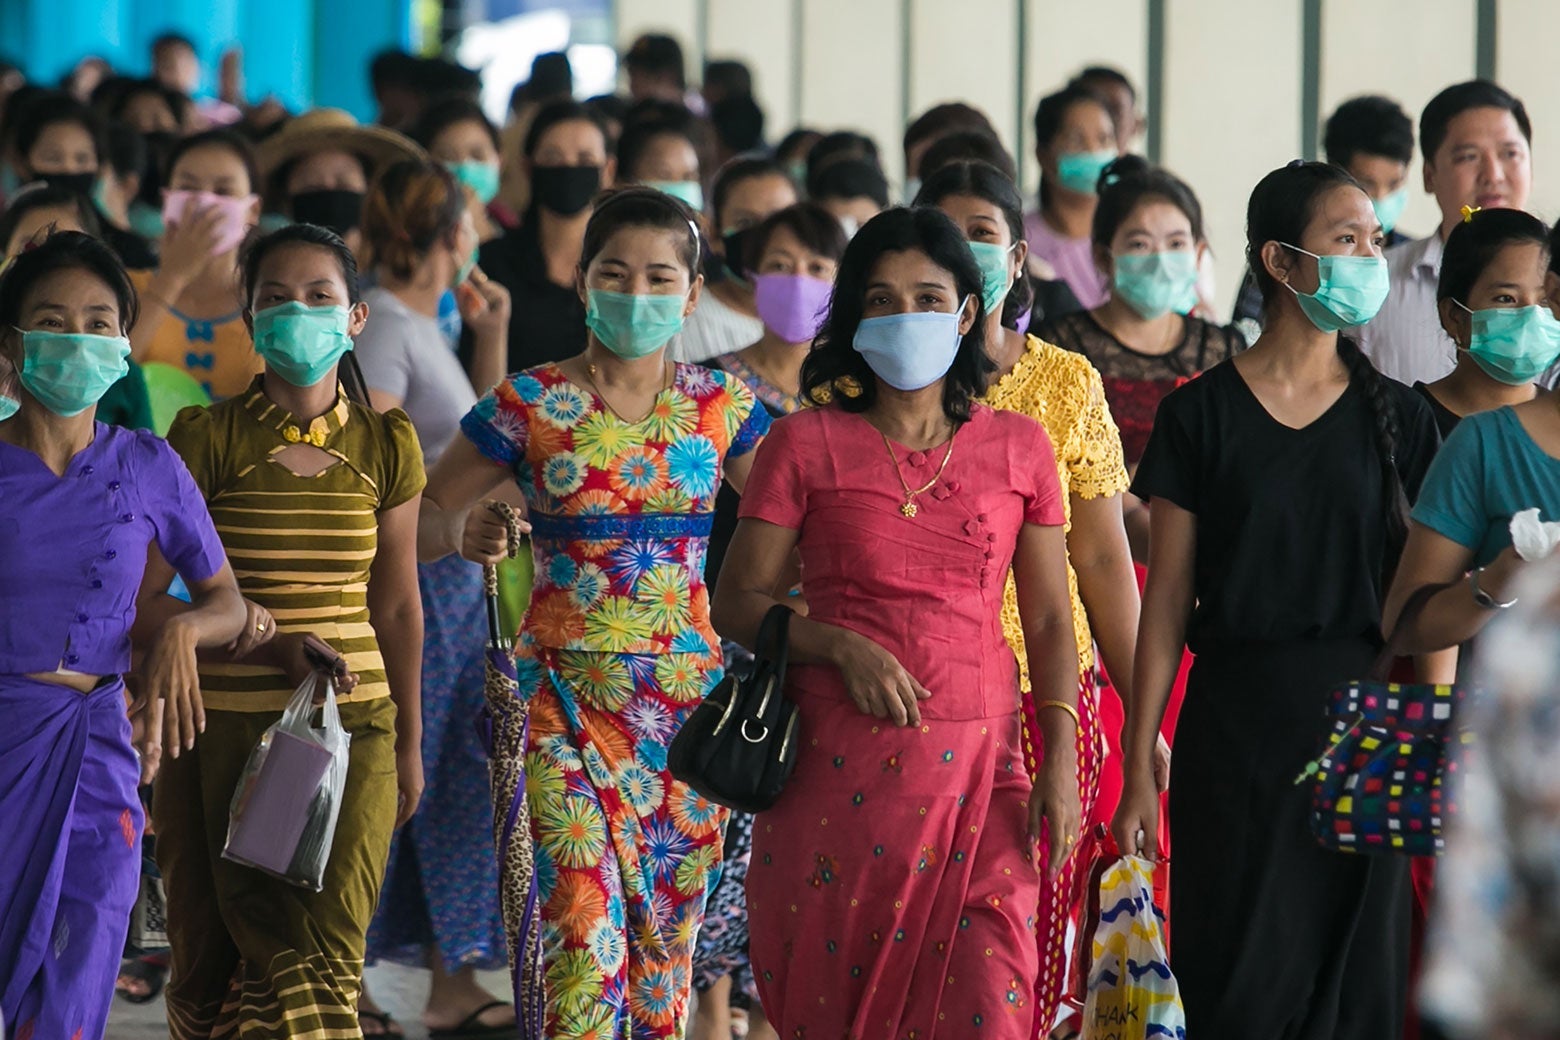 A crowd of women wearing protective masks